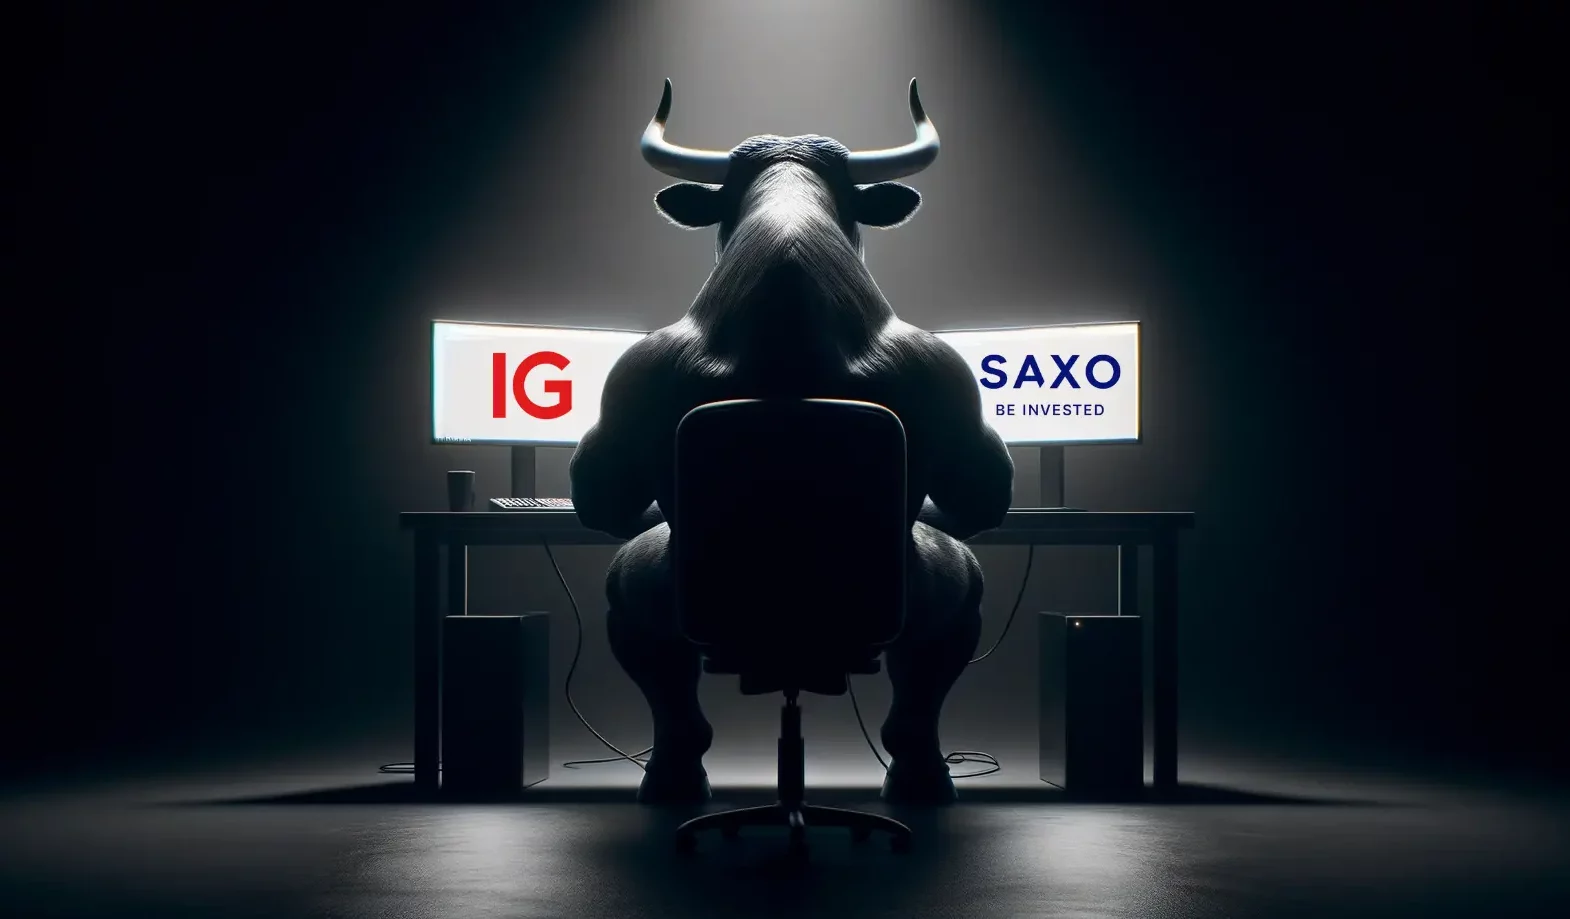 Conceptual image of a bull facing two computer monitors with 'IG' and 'SAXO' logos, symbolizing the competitive edge